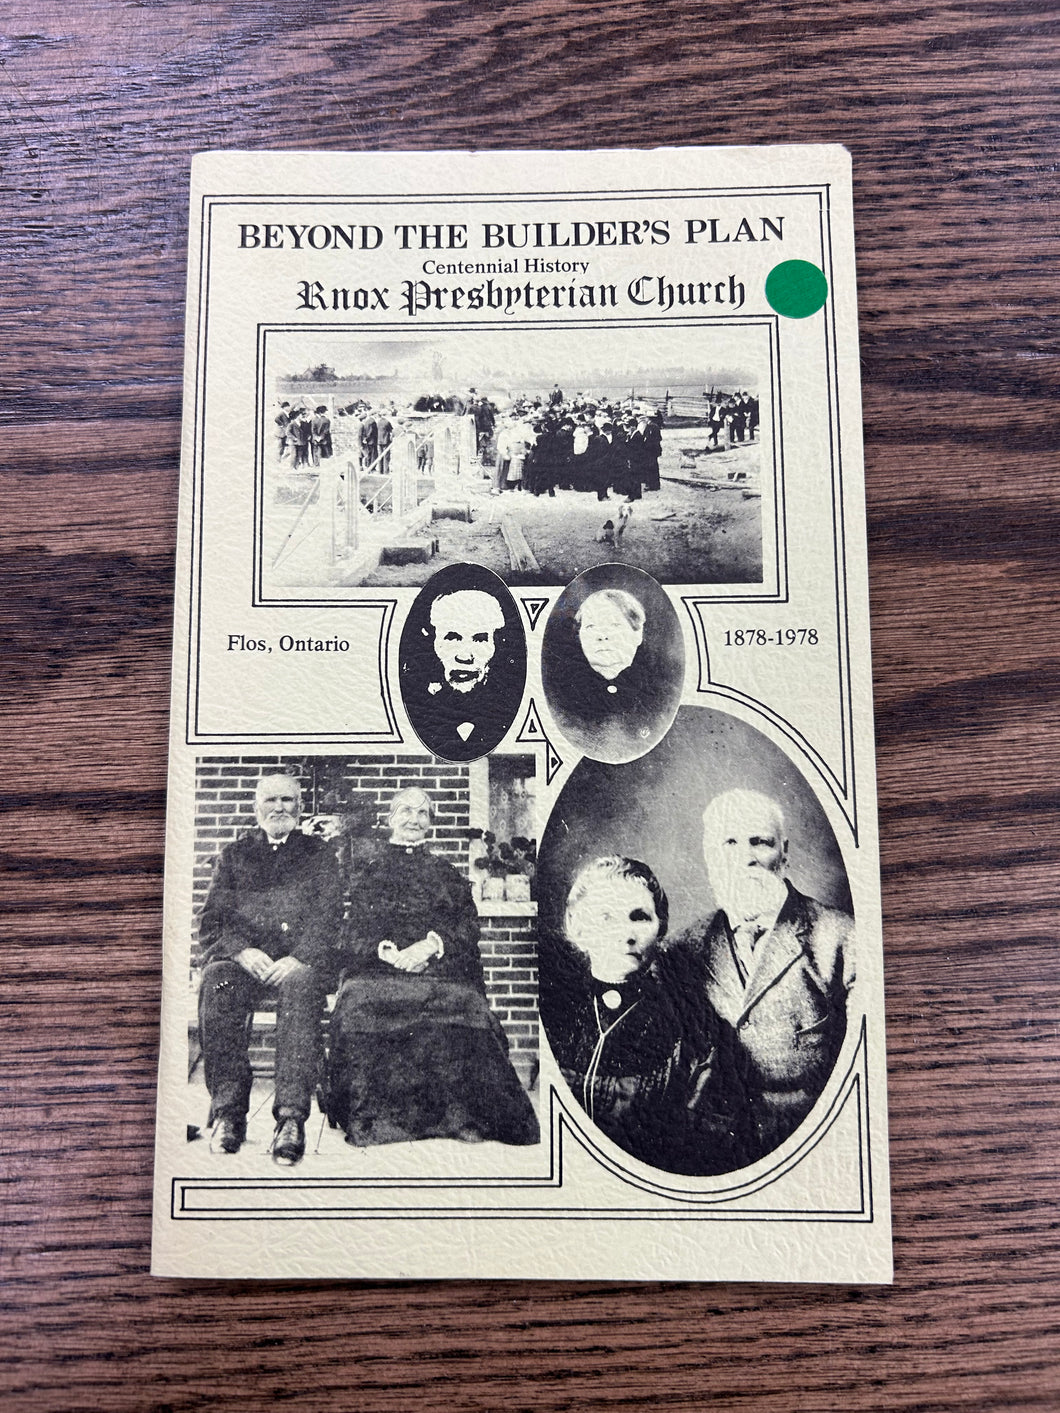 Beyond The Builder's Plan Centennial History of Knox Presbyterian Church Flos, Ontario 1878-1978 Published by Flos, Ontario, 1978